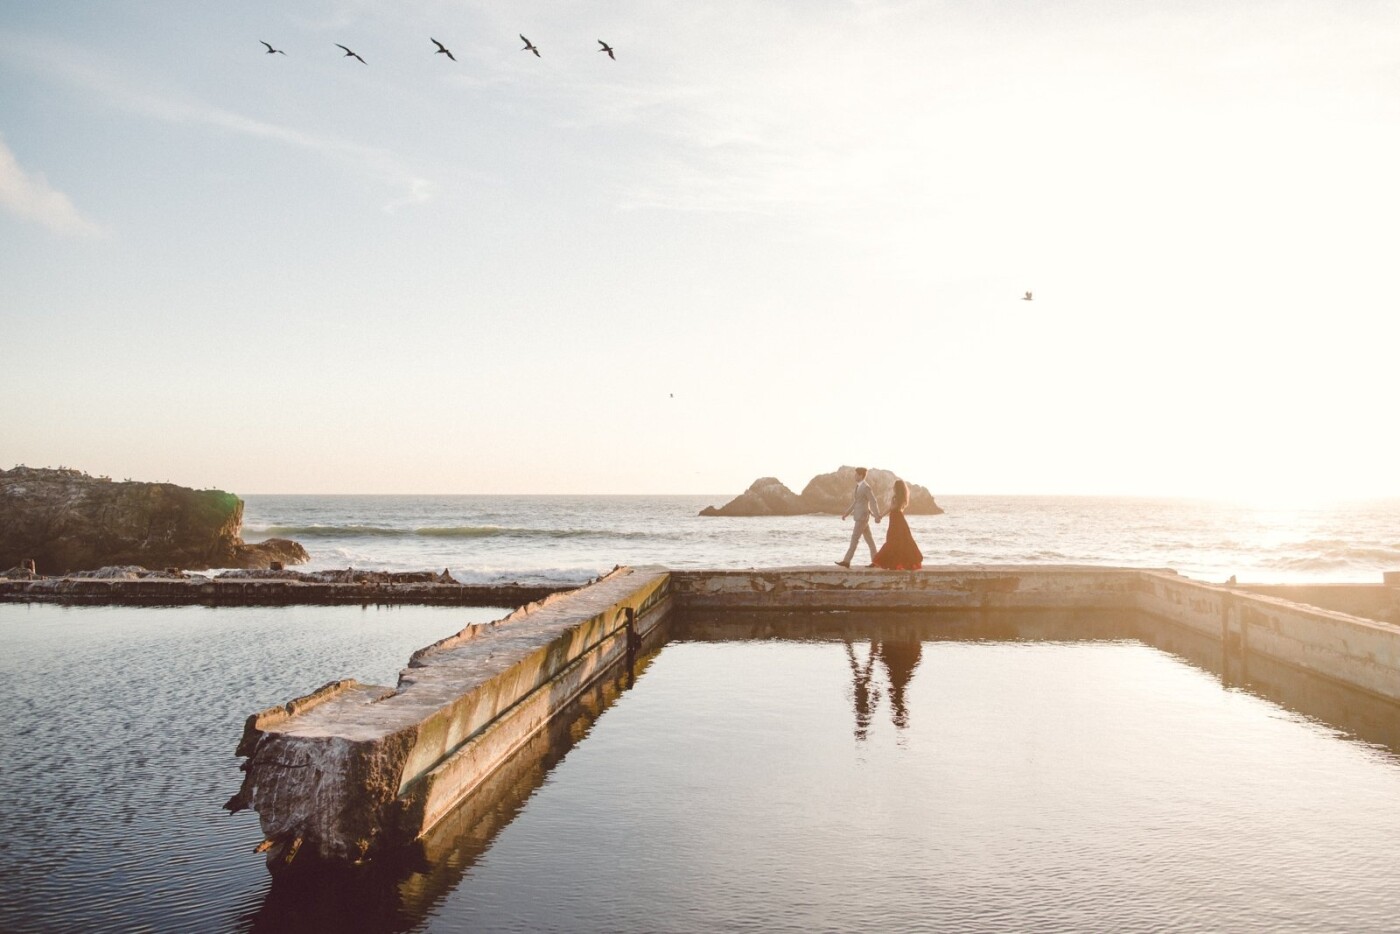 Here is where Anton took Lara’s hand and guided her across the old ruins of Sutro Baths in San Francisco. The ocean breeze caught her red dress and the sunset mirrored their reflection into the pool in front. The birds gracefully aligned into this frame and in the heartbeat of the shutter clicking, I understood that this moment was going to be timelessly captured. 